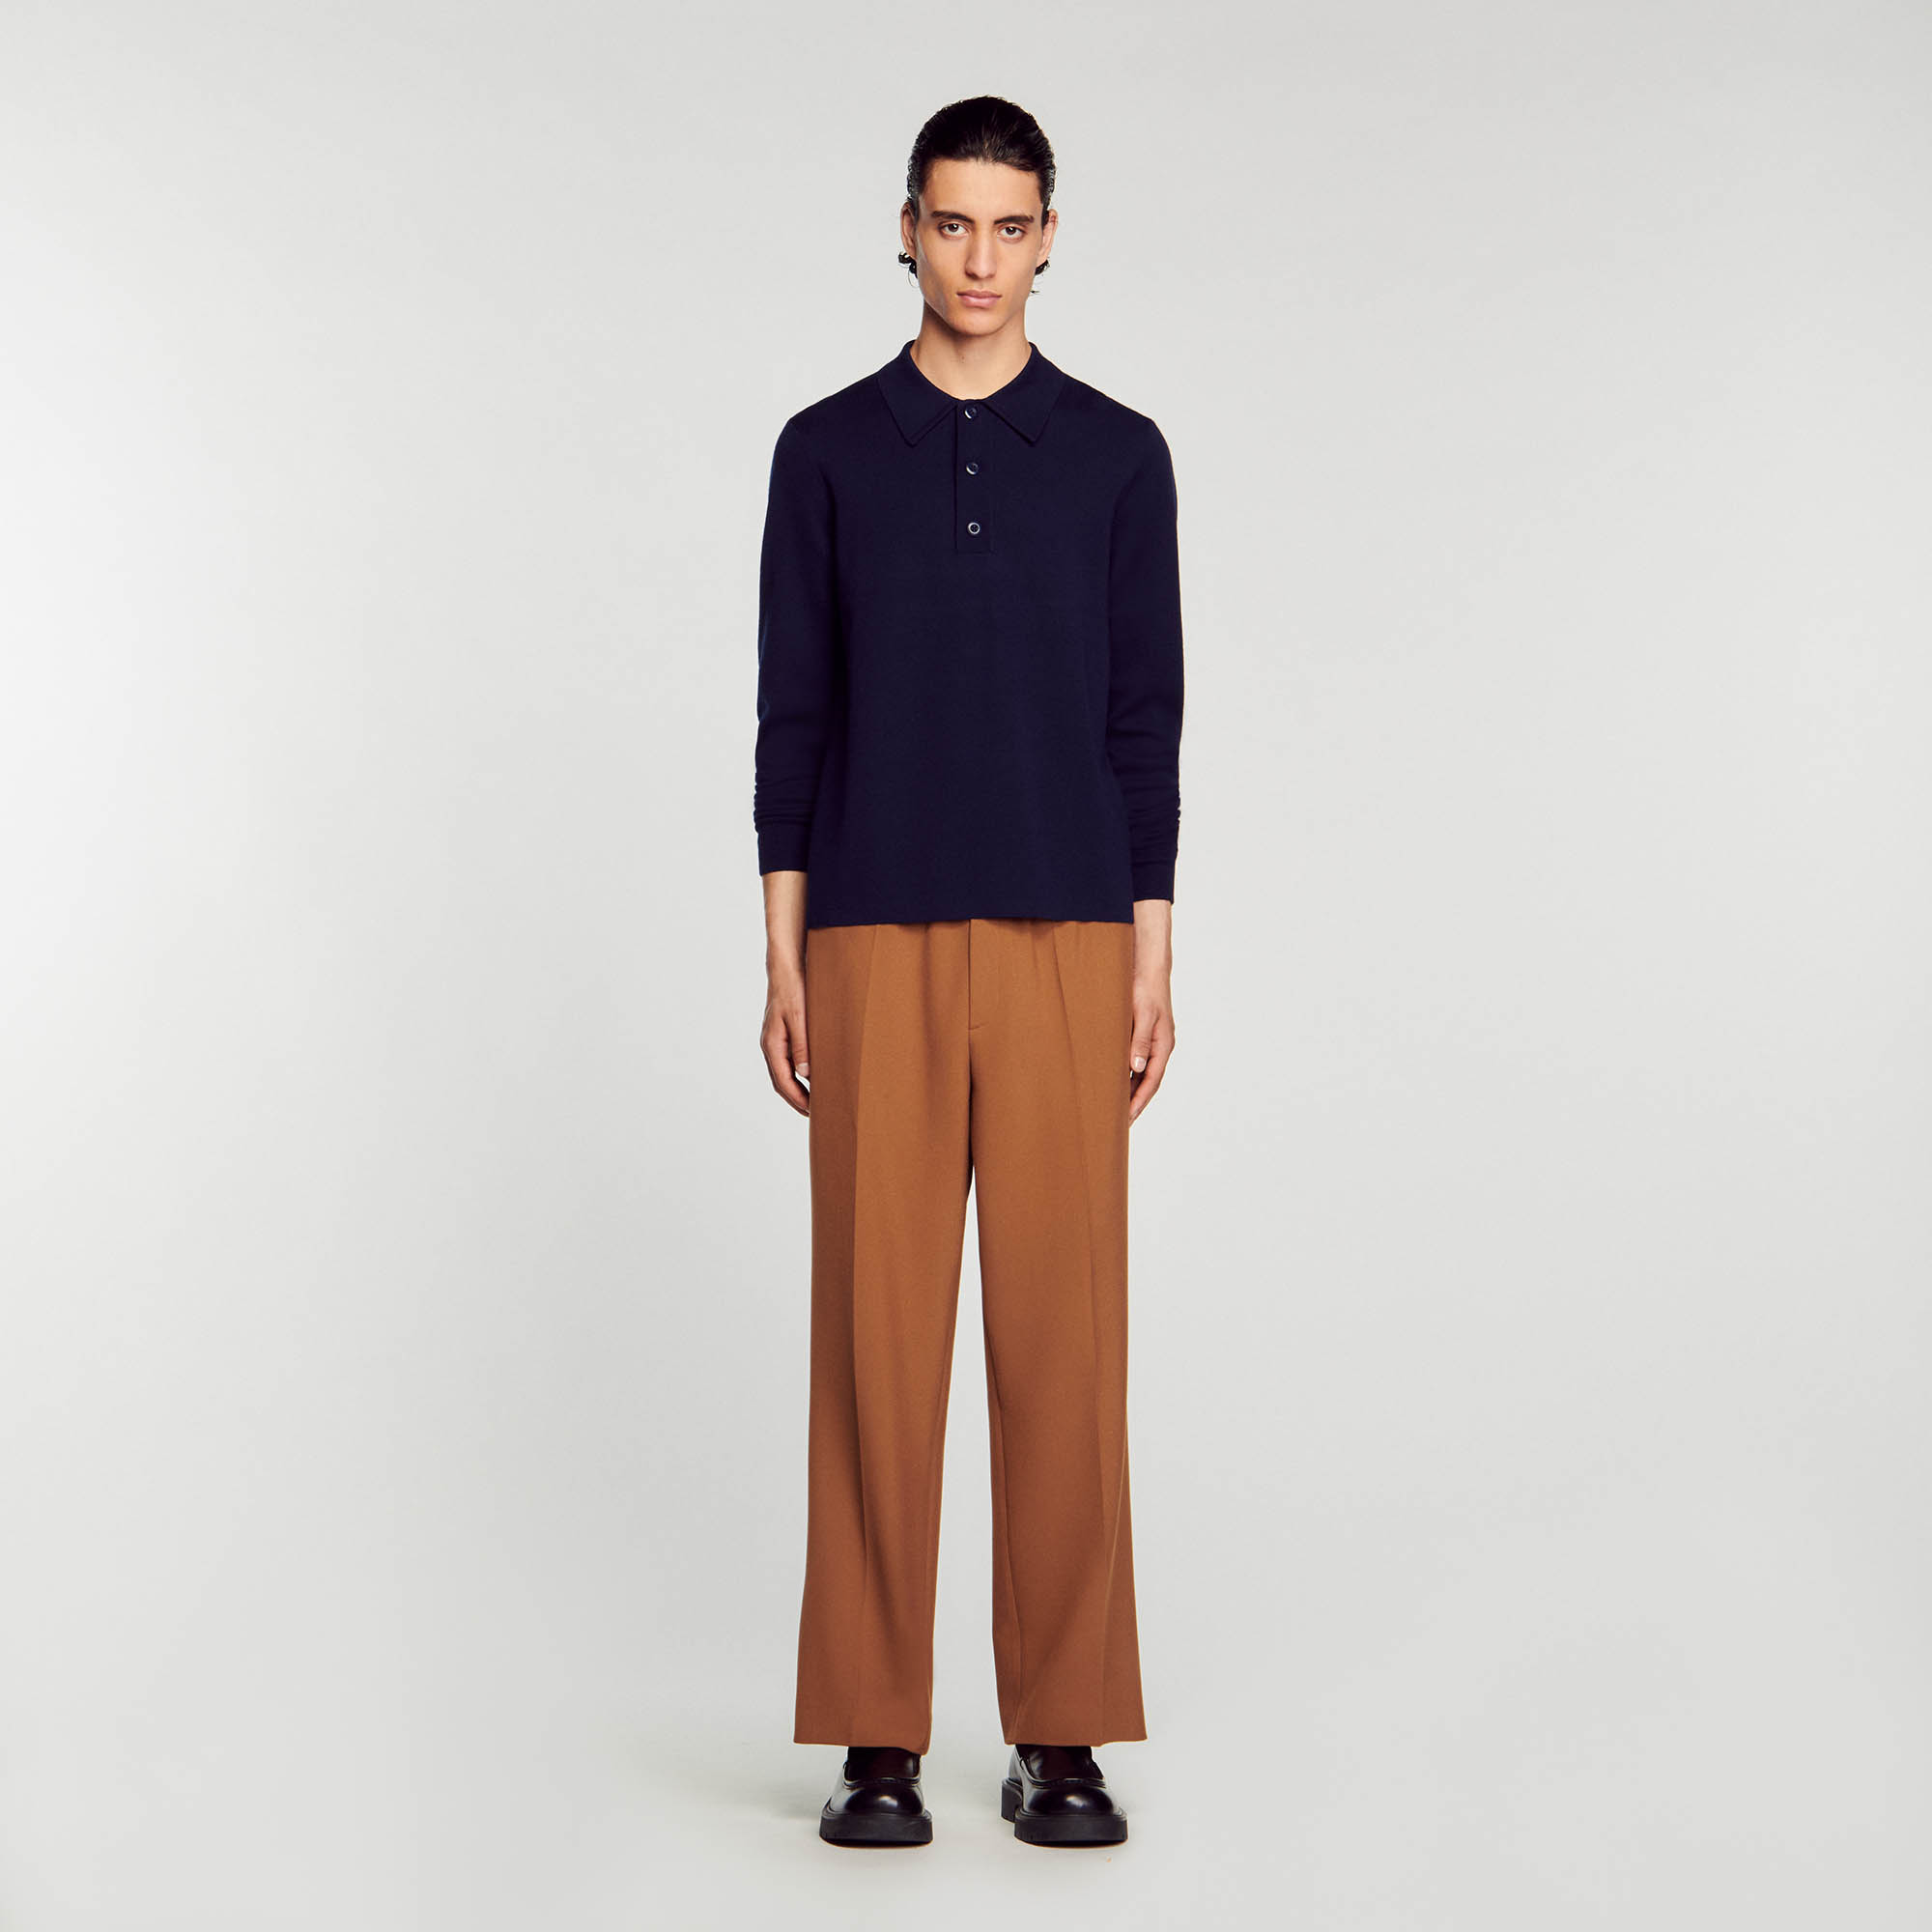 Sandro wool Wool jumper with button-down polo neck, long sleeves and ribbed trim